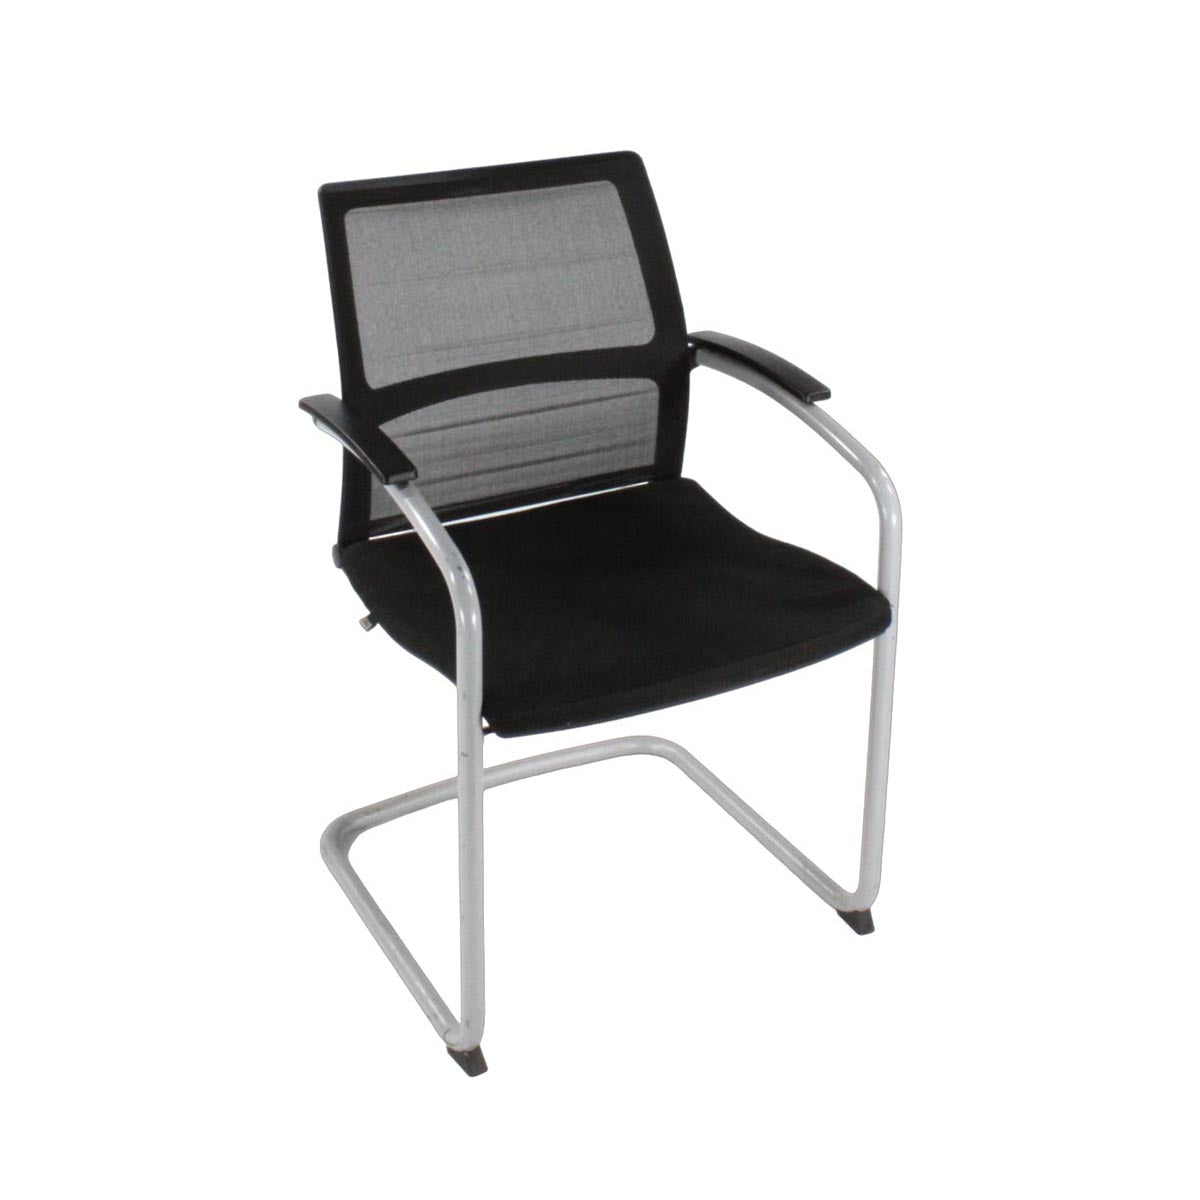 Sedus: Open Up Cantilever Chair with Mesh Back in Black Fabric - Refurbished